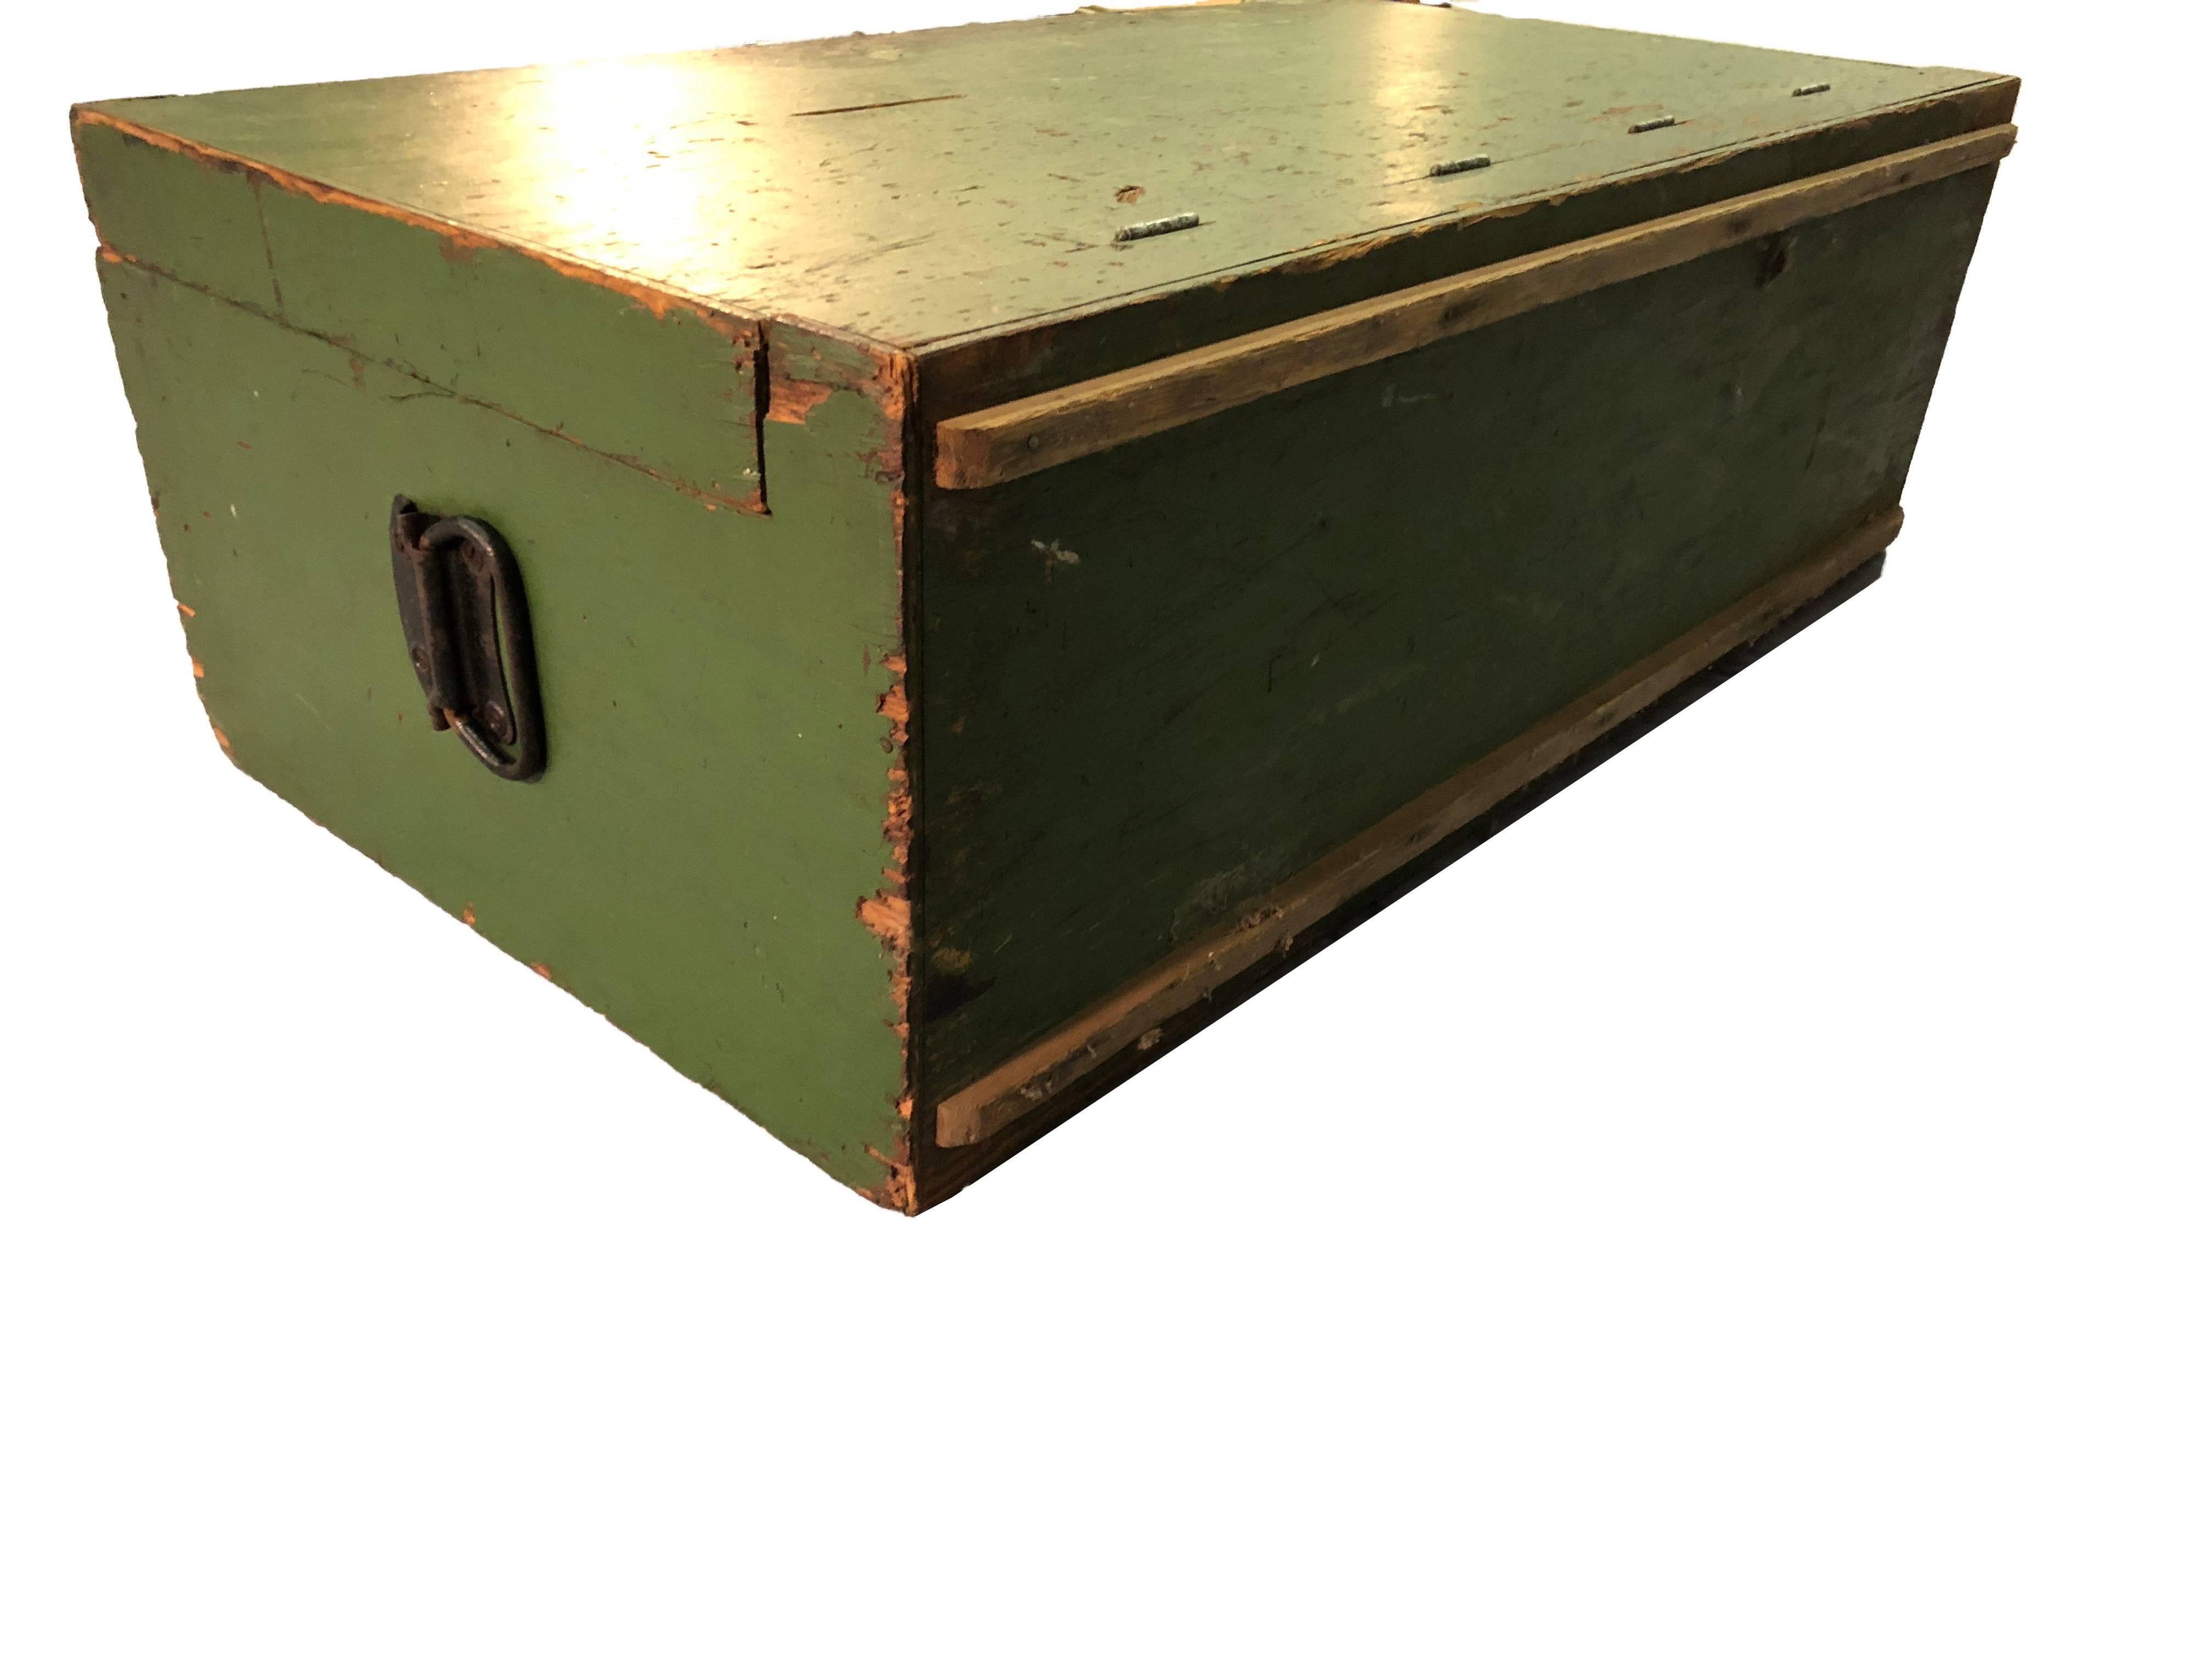 Hardwood Rustic Green Painted Tool Chest For Sale